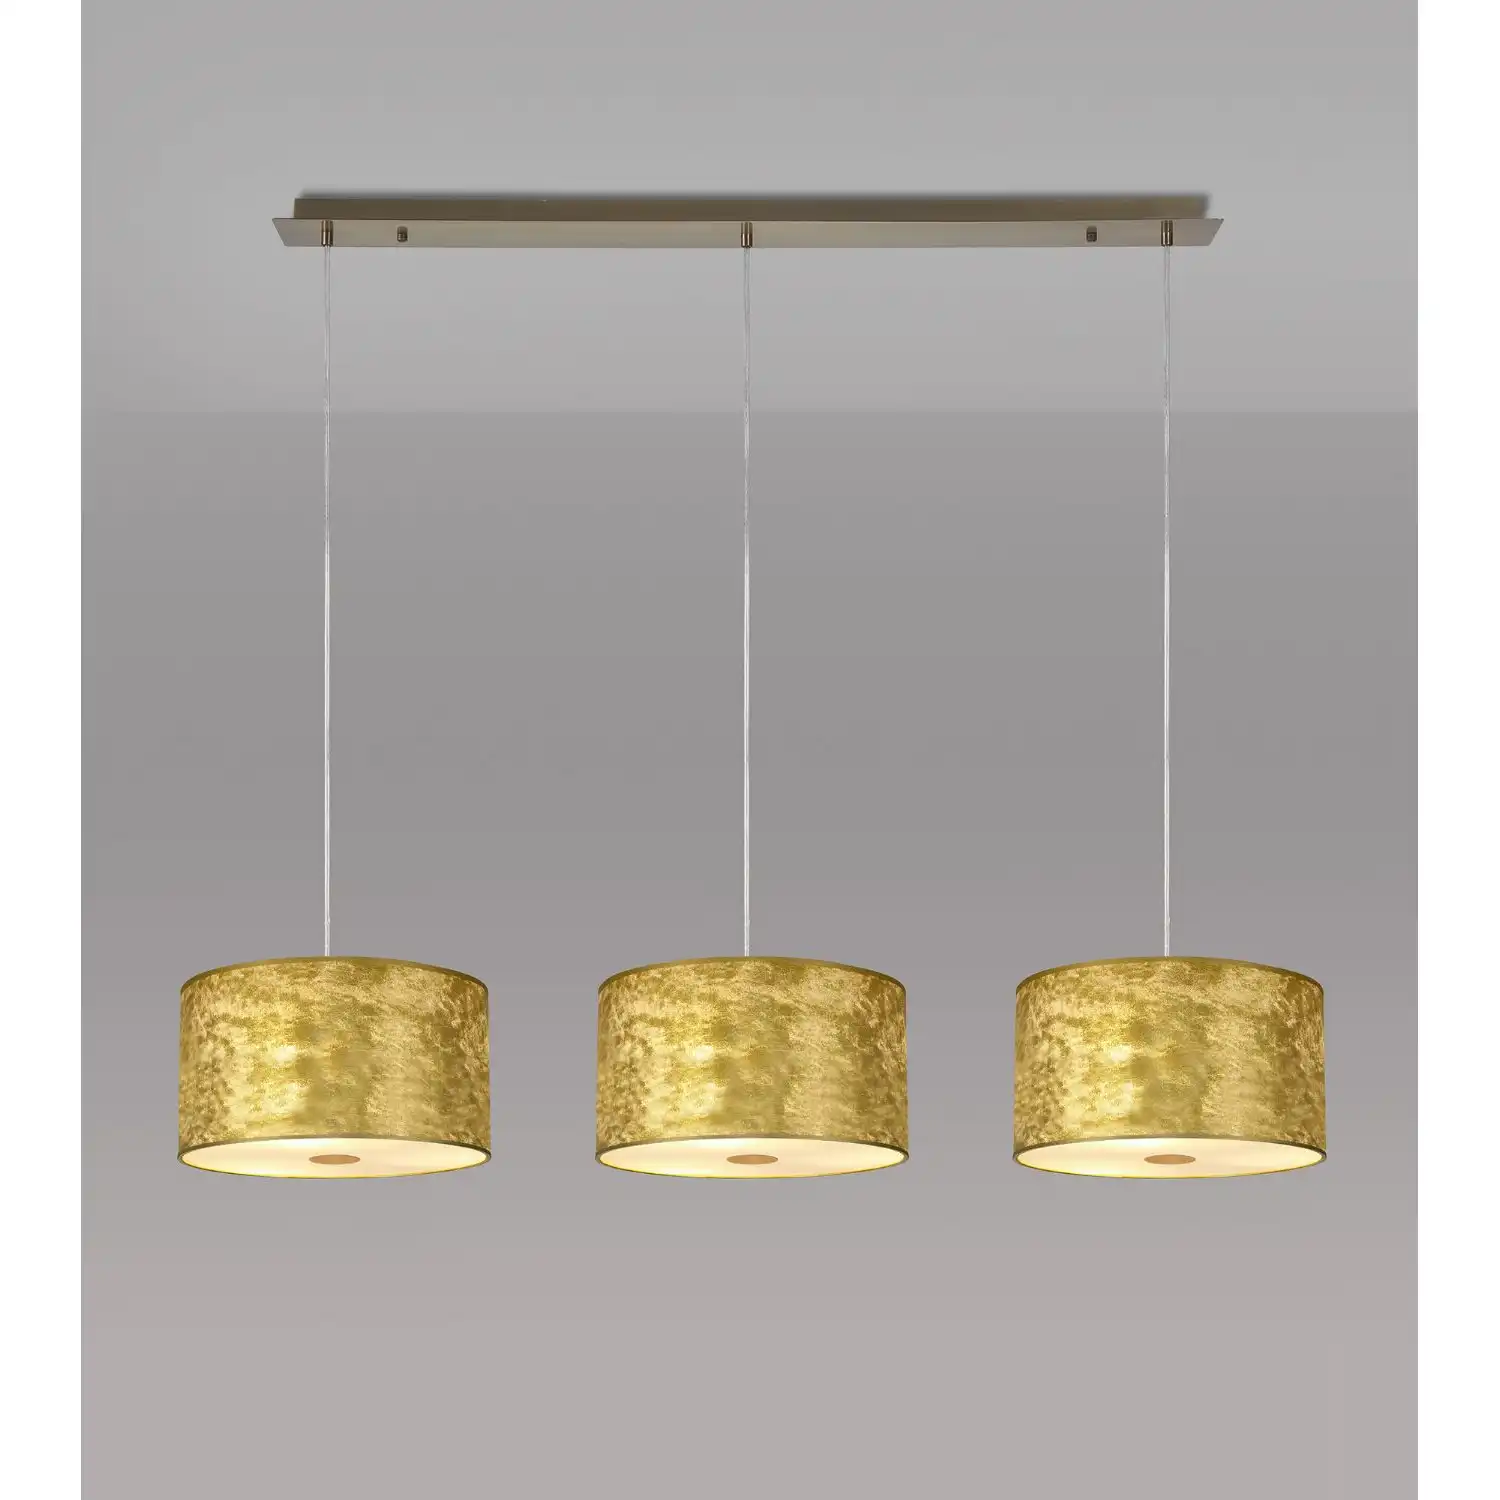 Baymont Antique Brass 3 Light E27 2m Linear Pendant With 300mm Gold Leaf Shade With Frosted Acrylic Diffuser With Antique Brass Centre